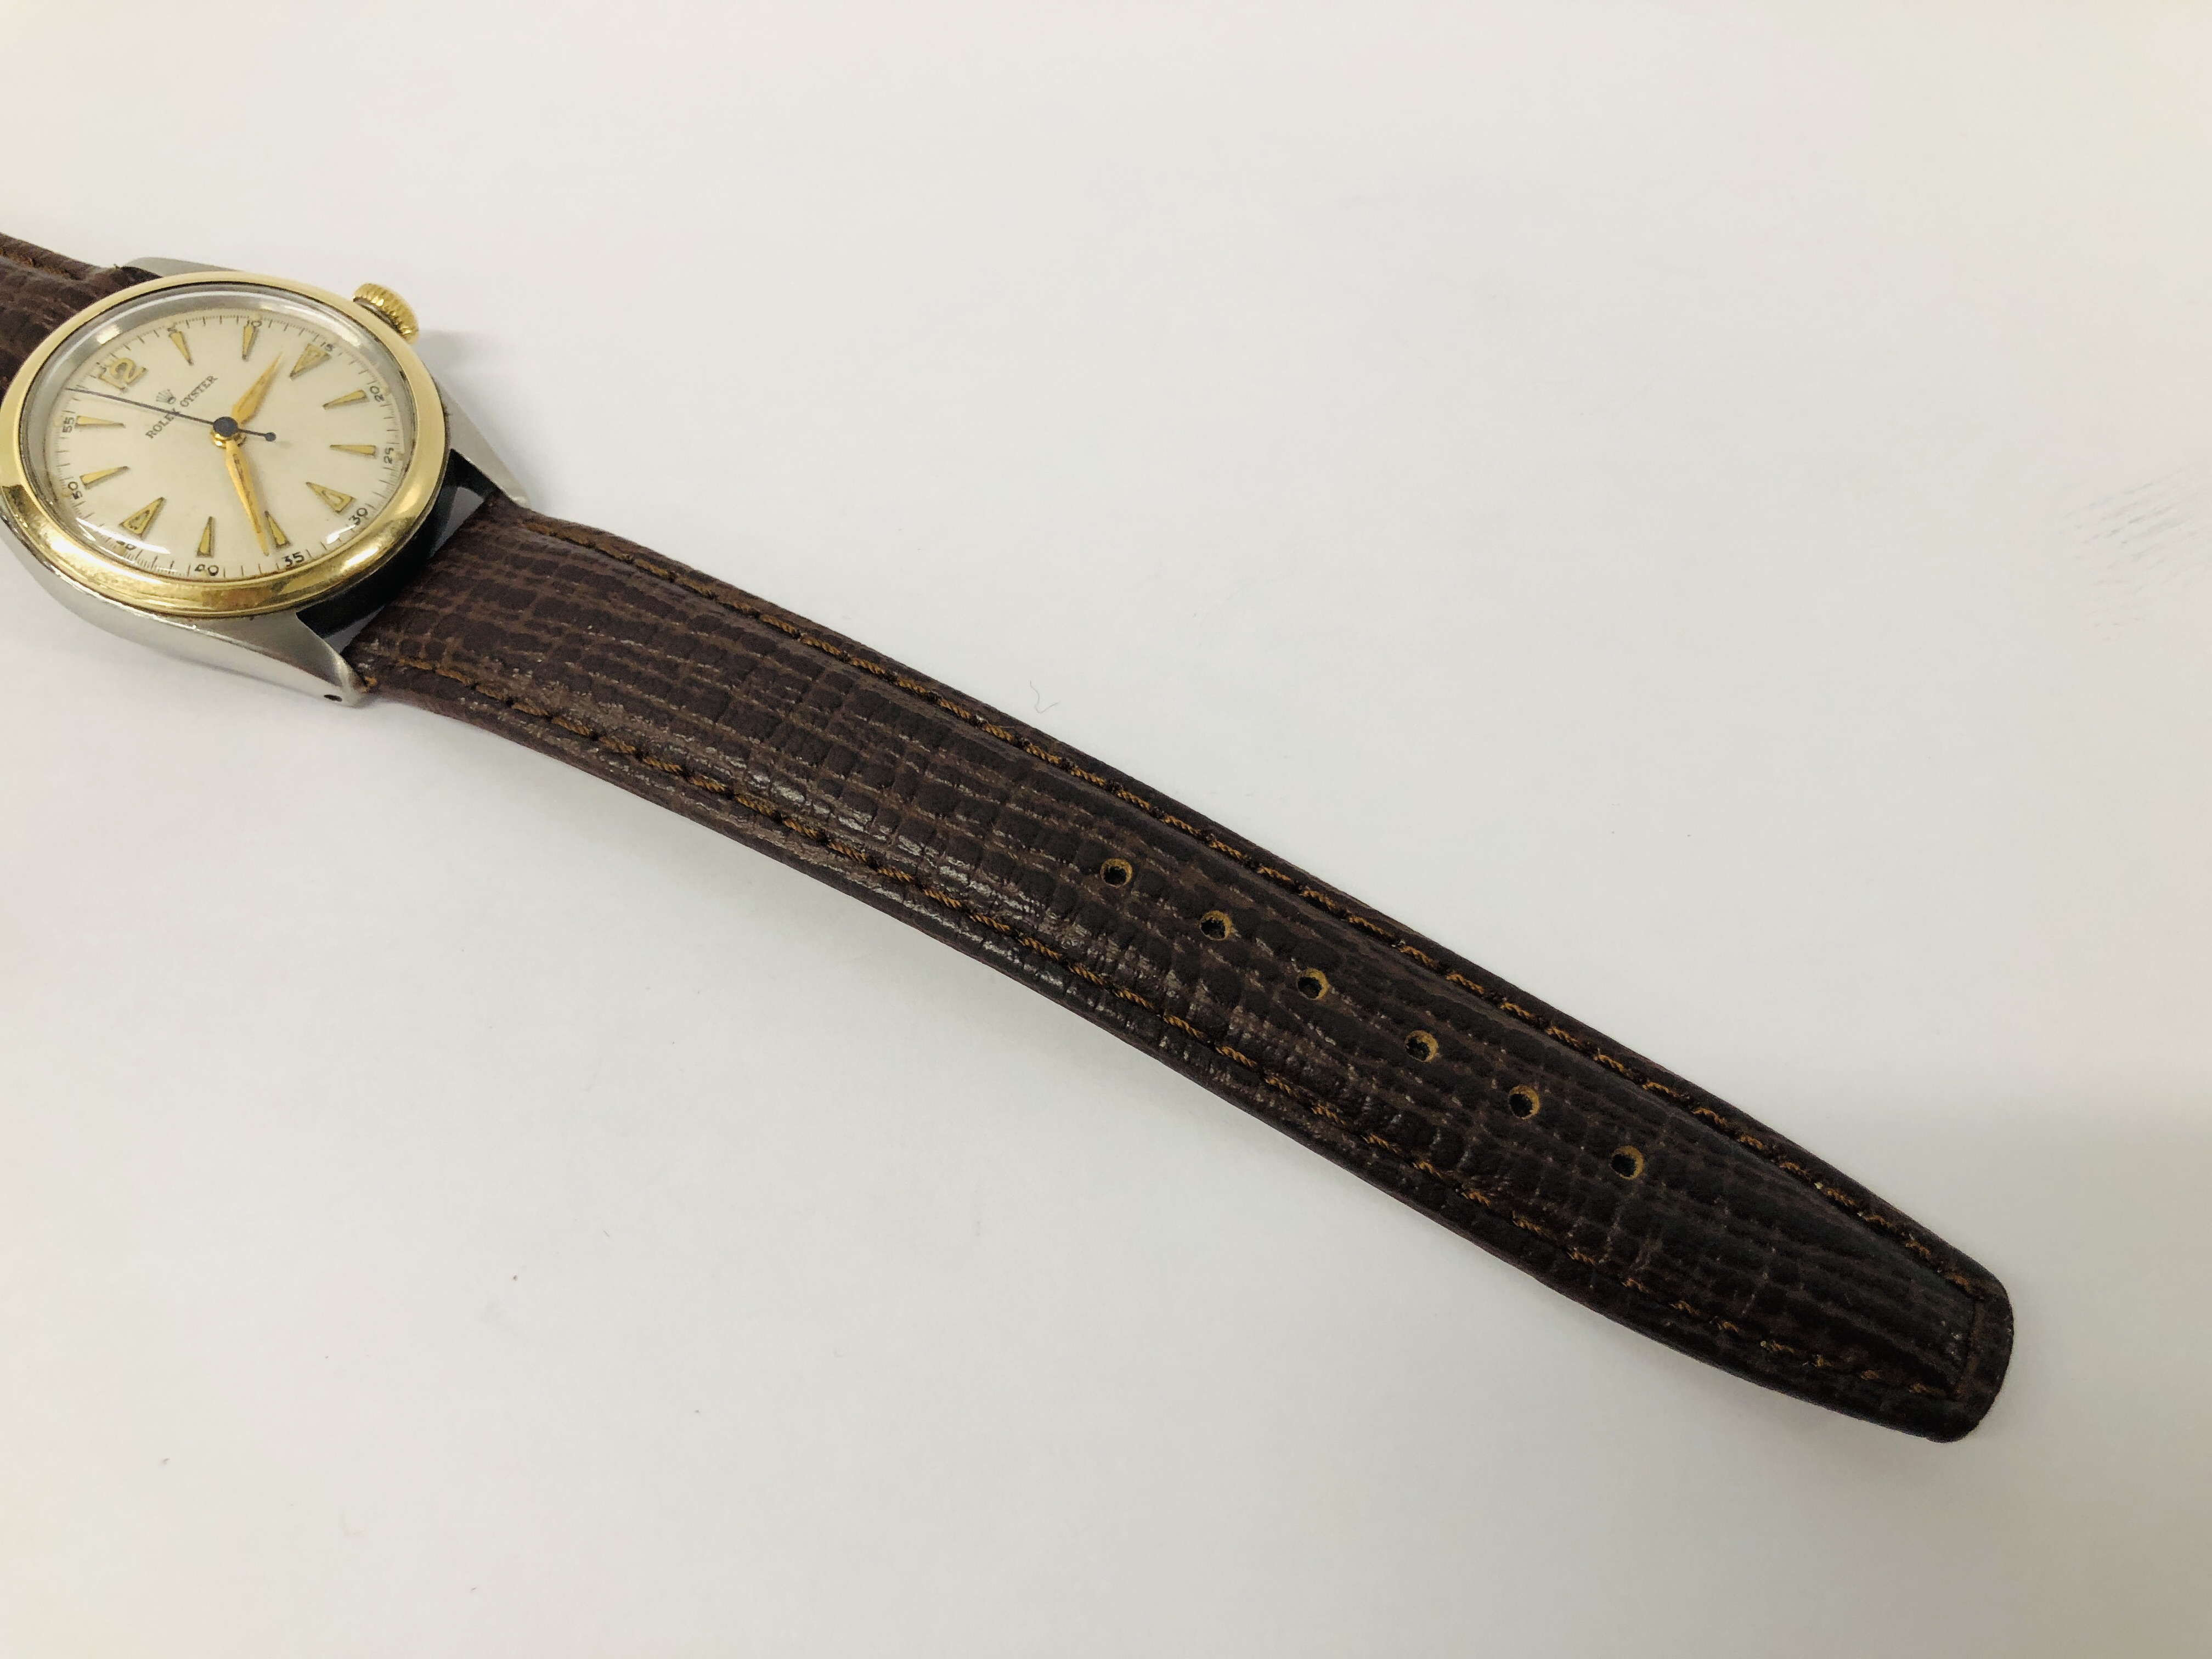 A VINTAGE CIRCA 1950 GENTLEMANS ROLEX OYSTER WRIST WATCH ON BROWN LEATHER REPLACEMENT STRAP. - Image 4 of 10